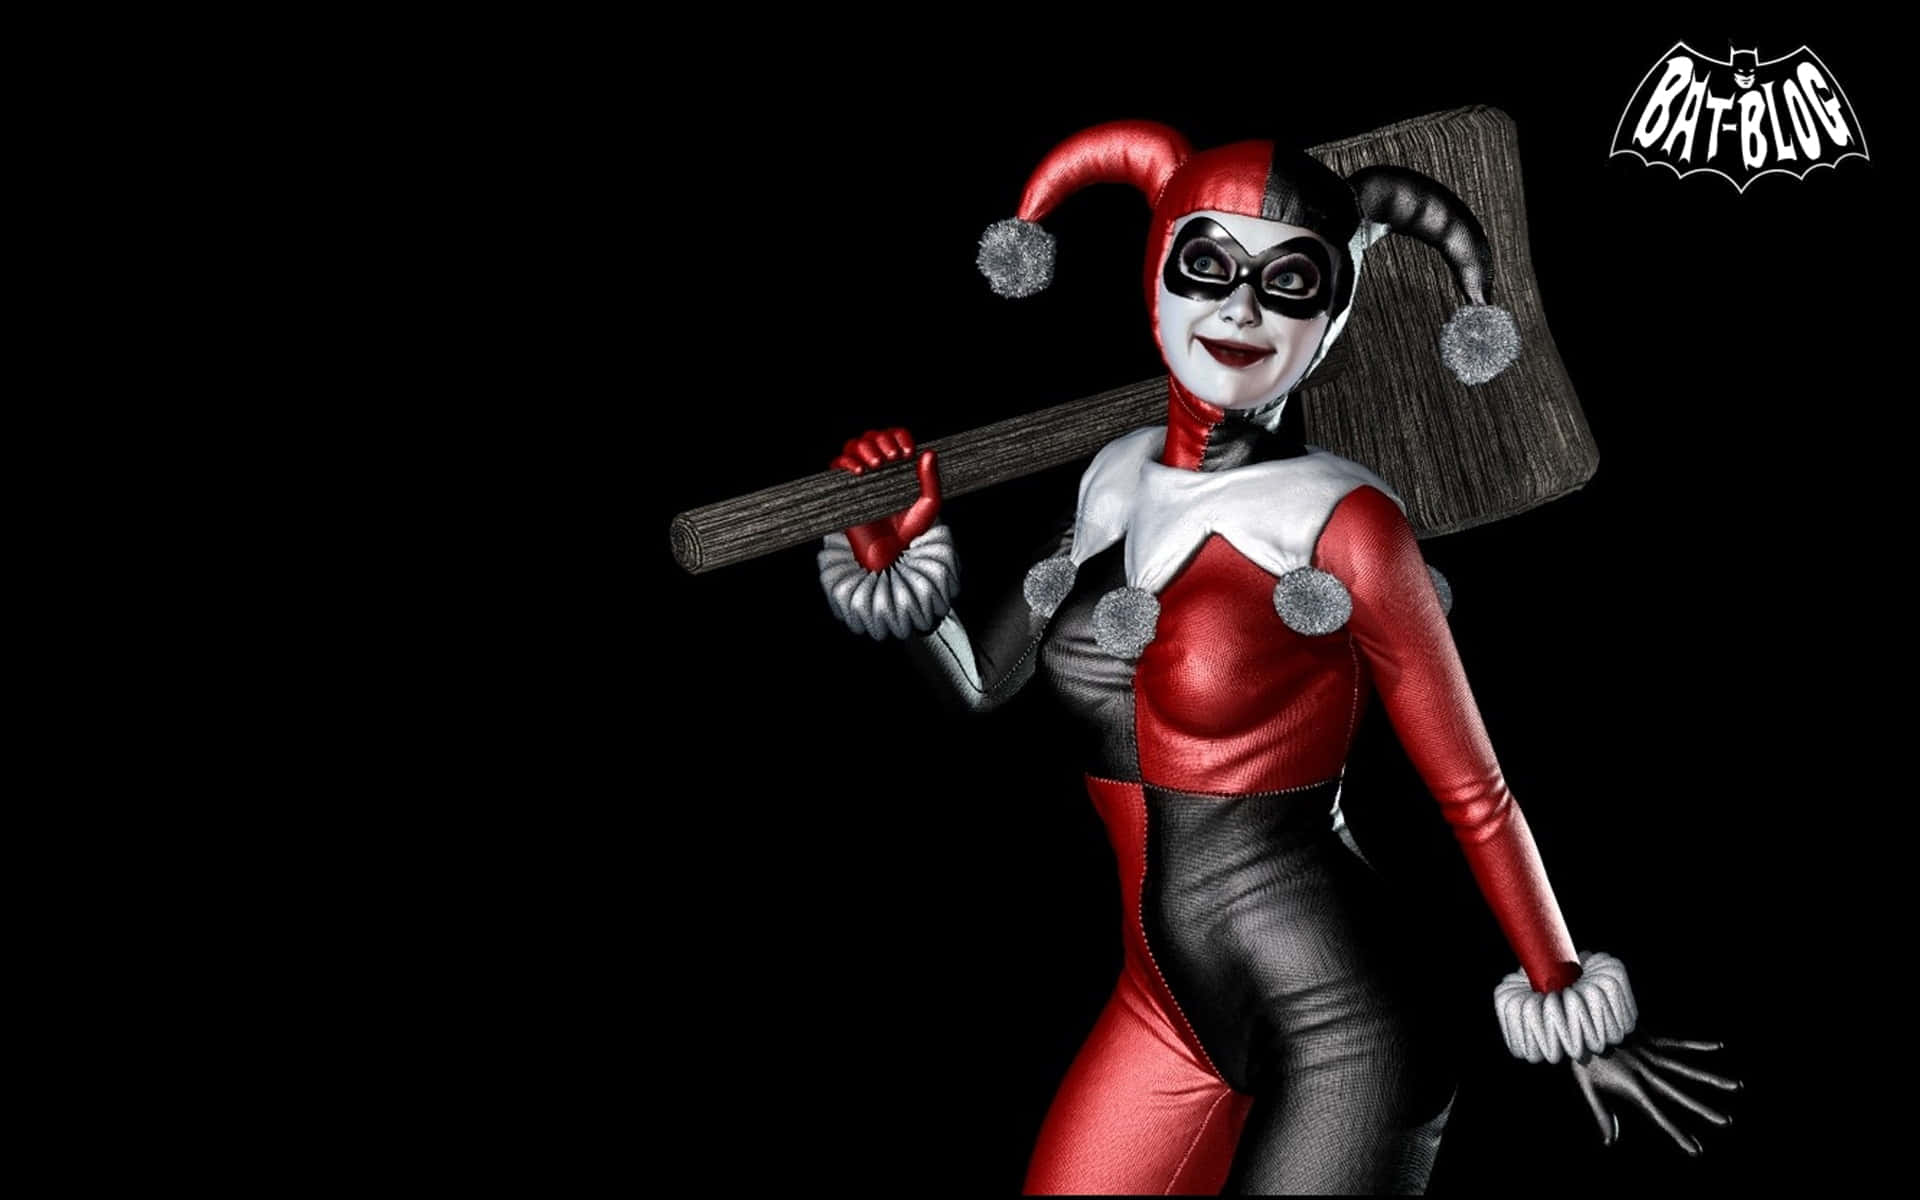 The vivacious Harley Quinn swings her signature hammer with flair and chaos. Wallpaper